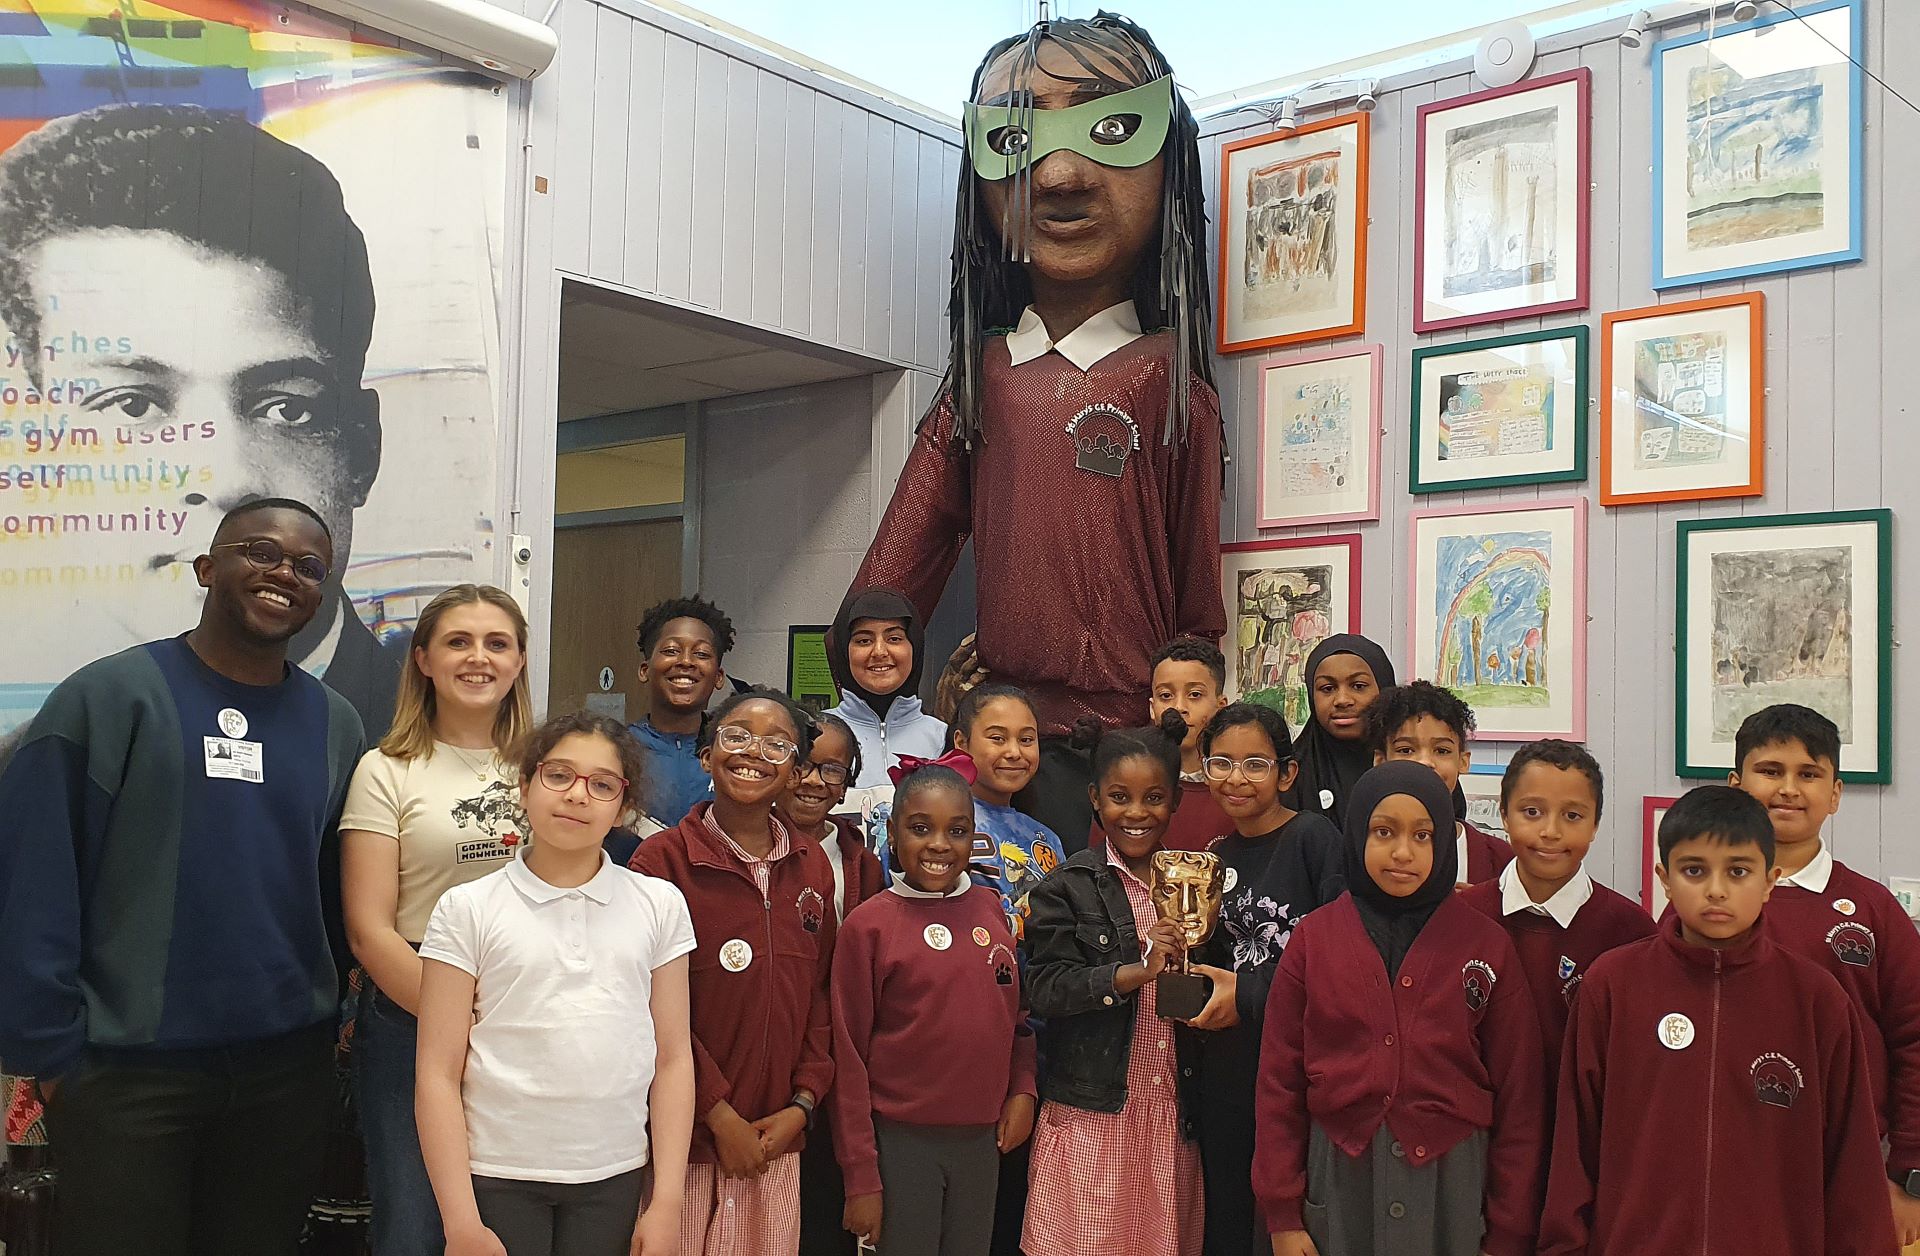 A group St Mary’s CofE Junior and Infant School smiling, standing alongside BAFTA Roadshow presenters De-Graft Mensah (left) and Kia Pegg (right).